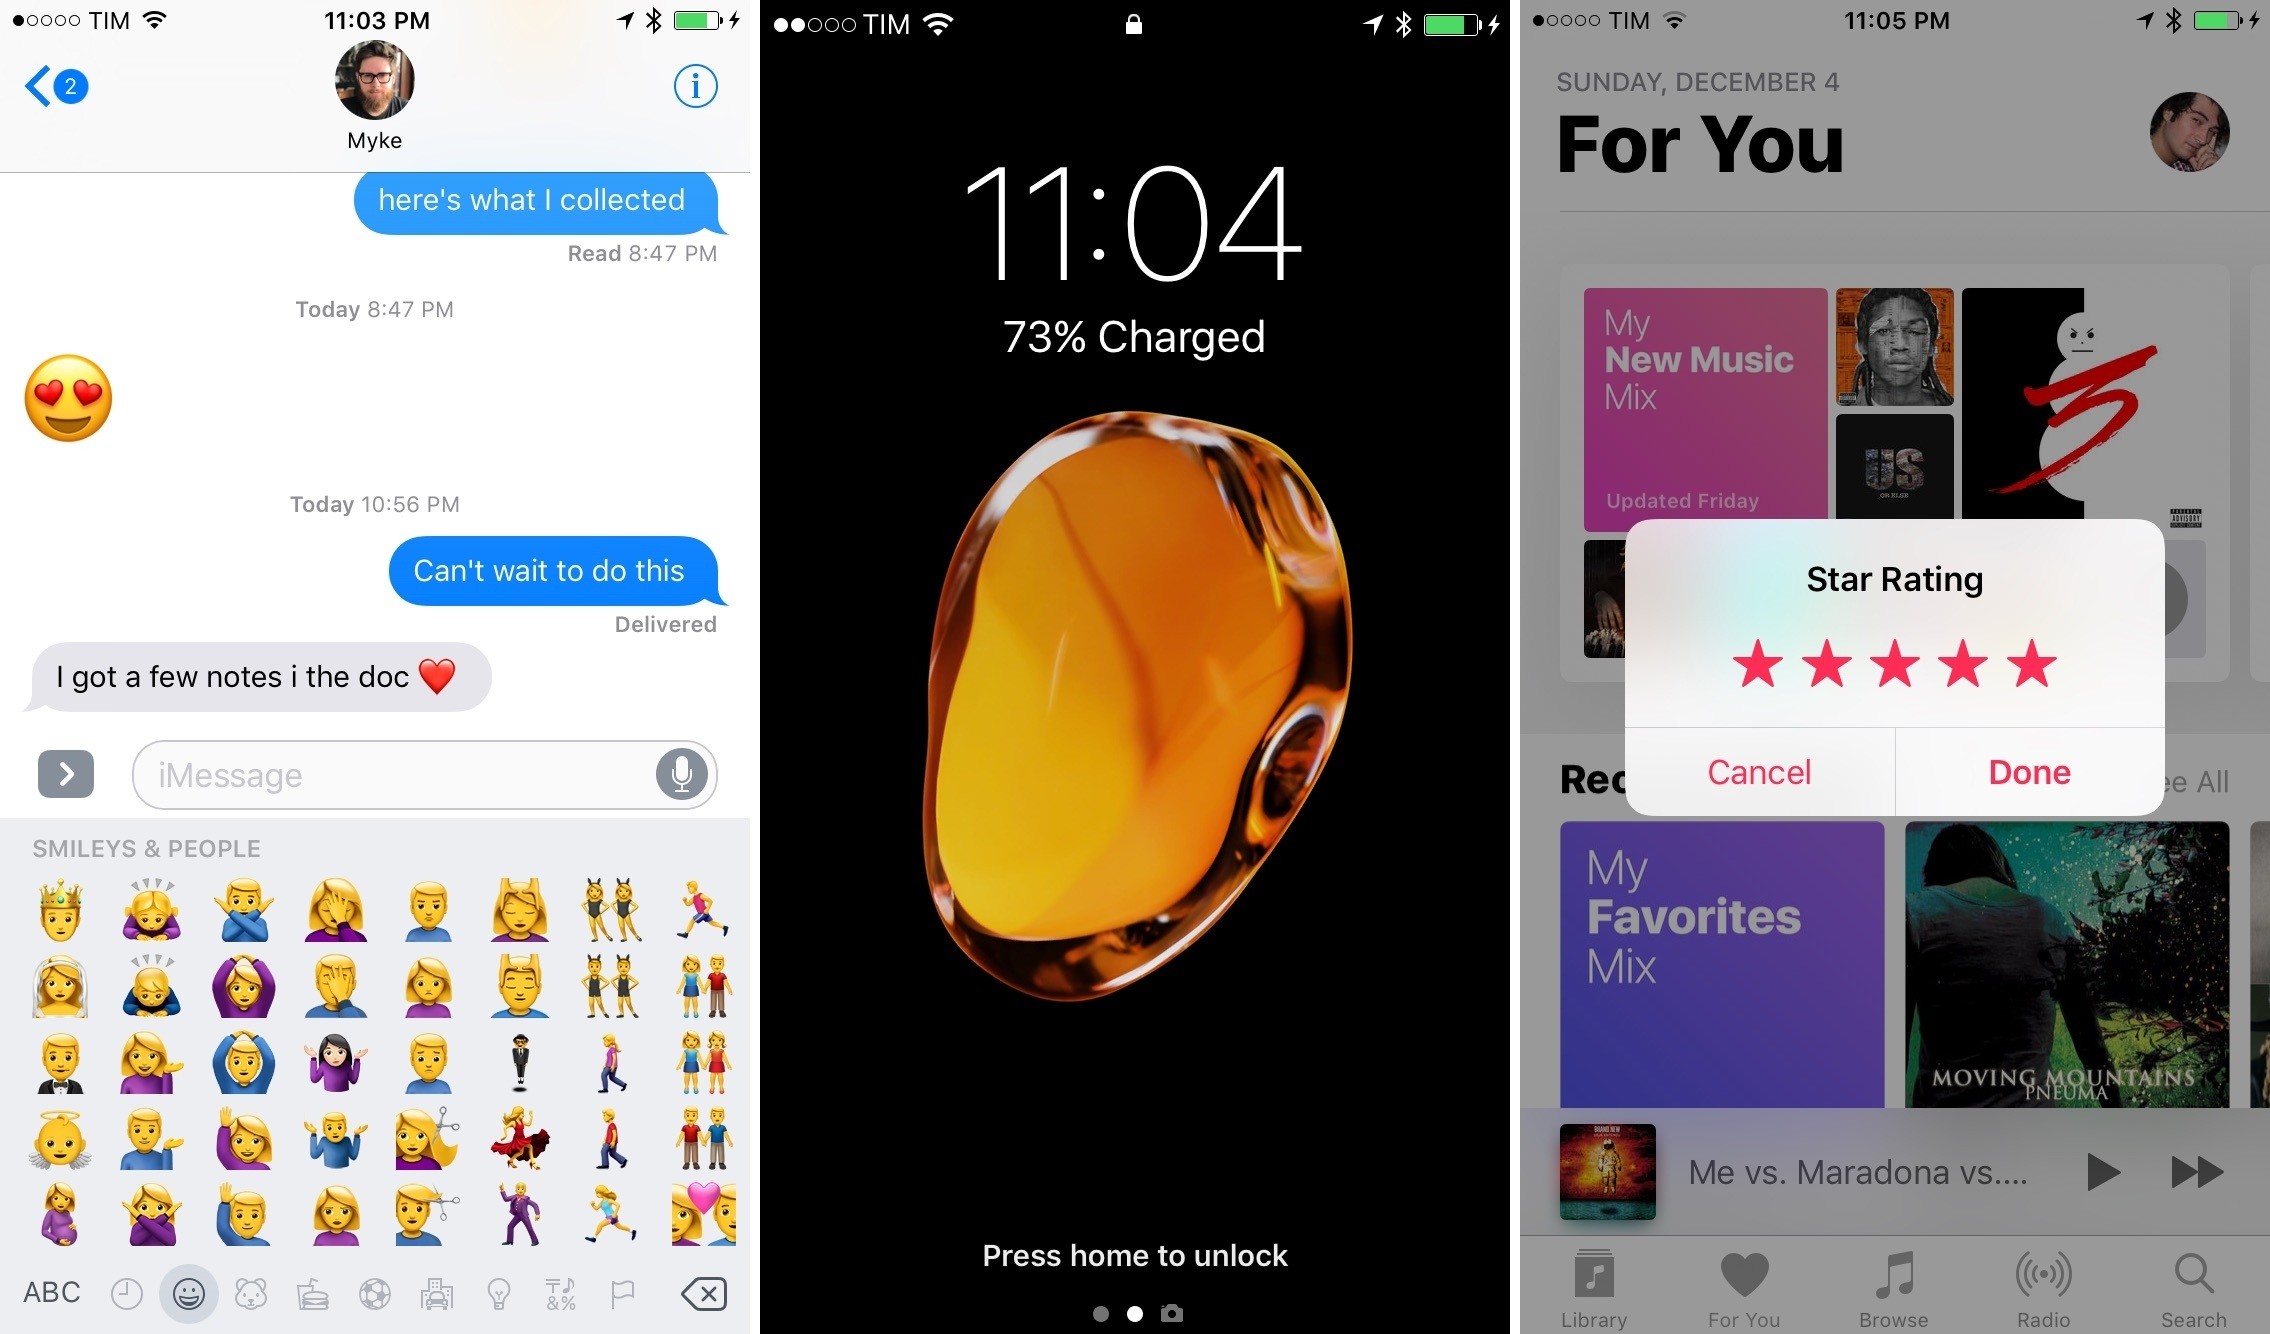 2270x1334 Apple Releases iOS 10.2 with new Emoji, TV App, and More